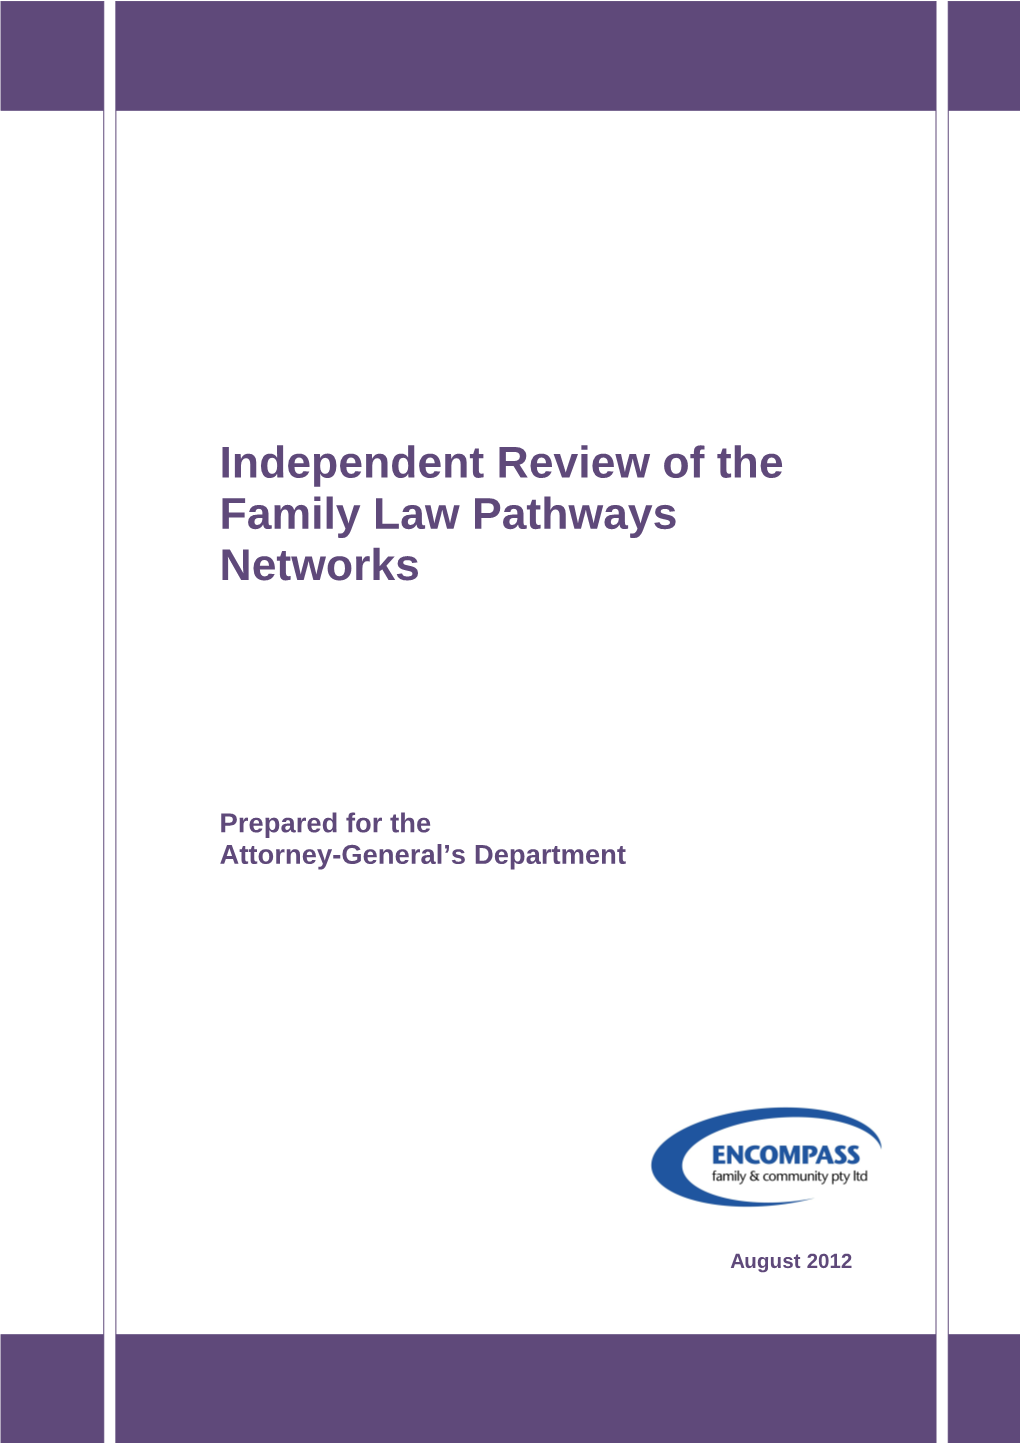 Independent Review of the Family Law Pathways Networks